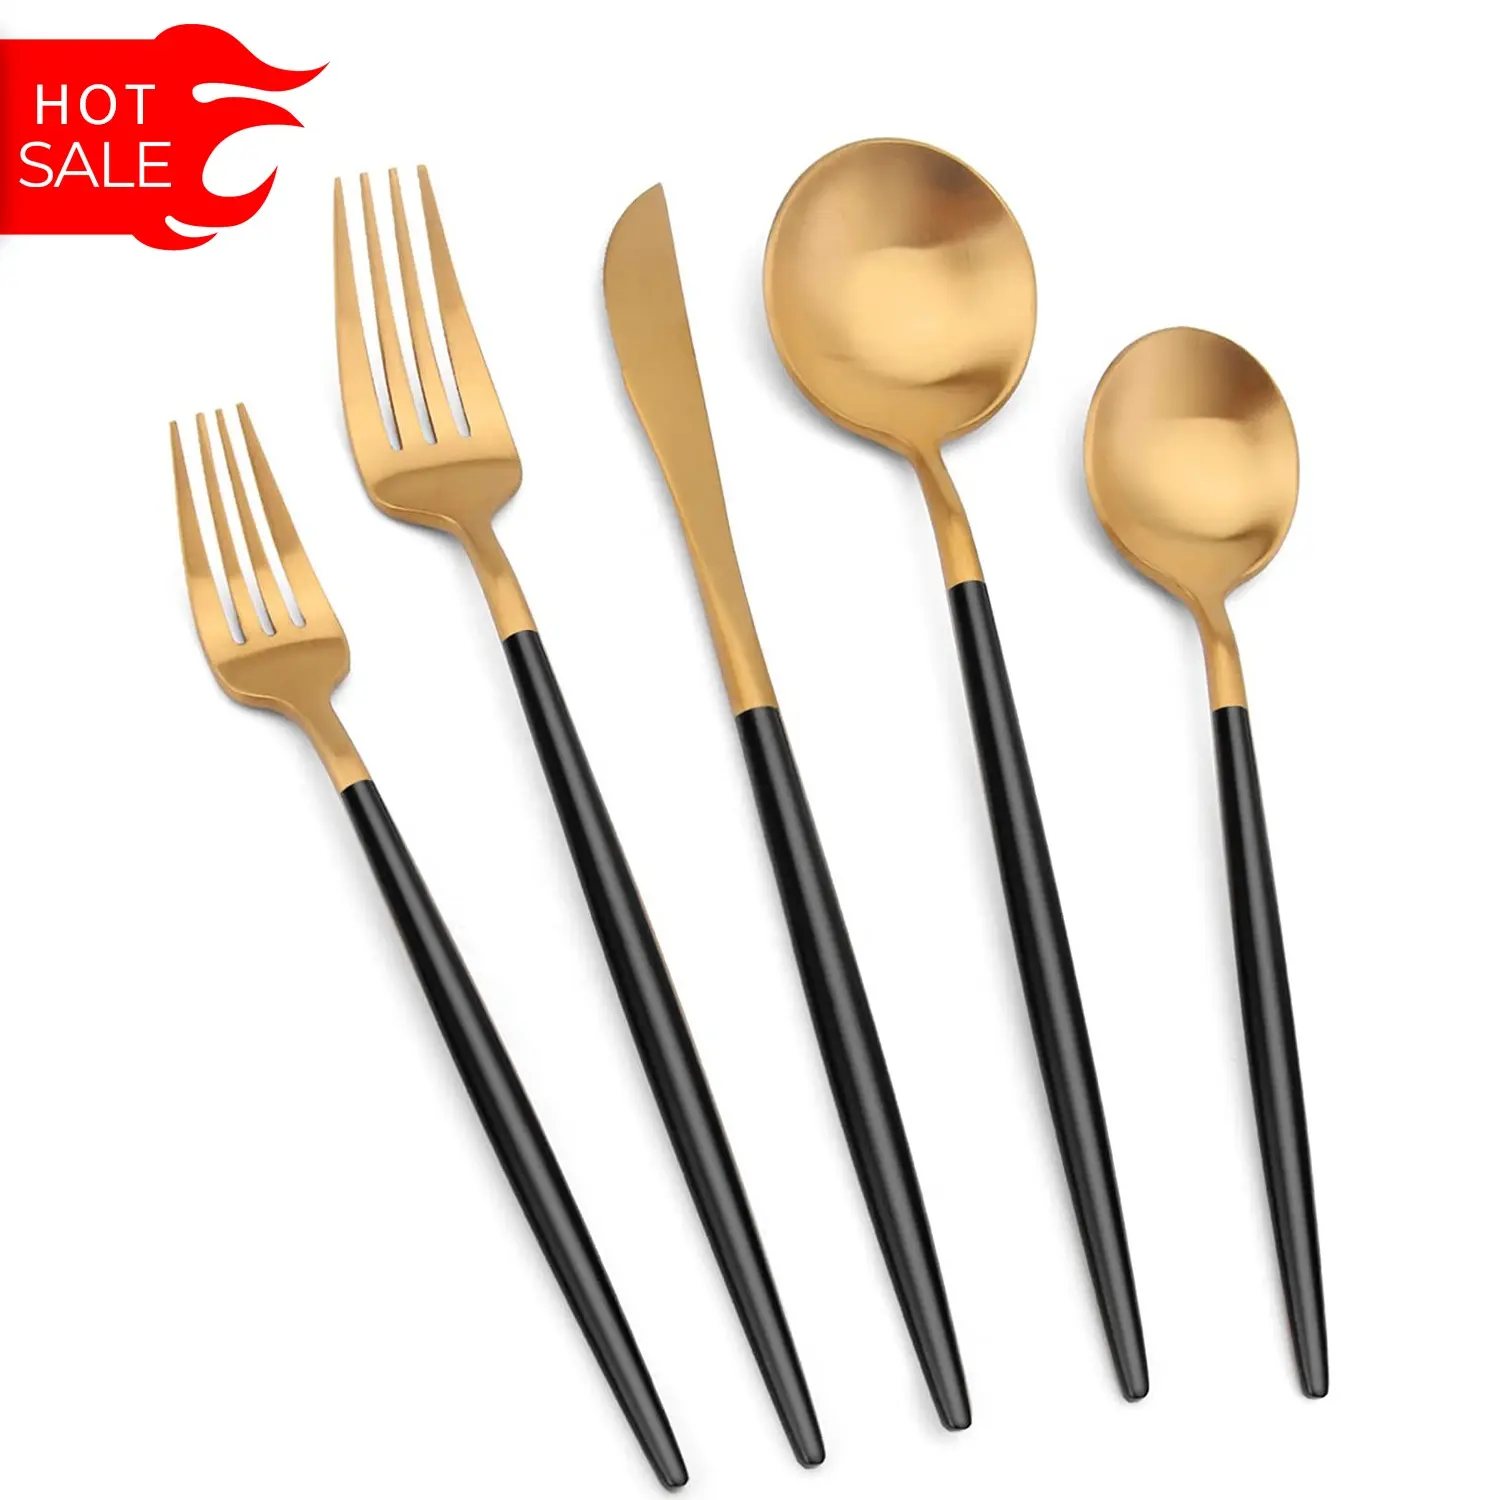 Portuguese Stainless Steel Spoon And Fork Sets Besteck Couvert Cubiertos Matte Black And Gold Flatware Silverware Cutlery Set